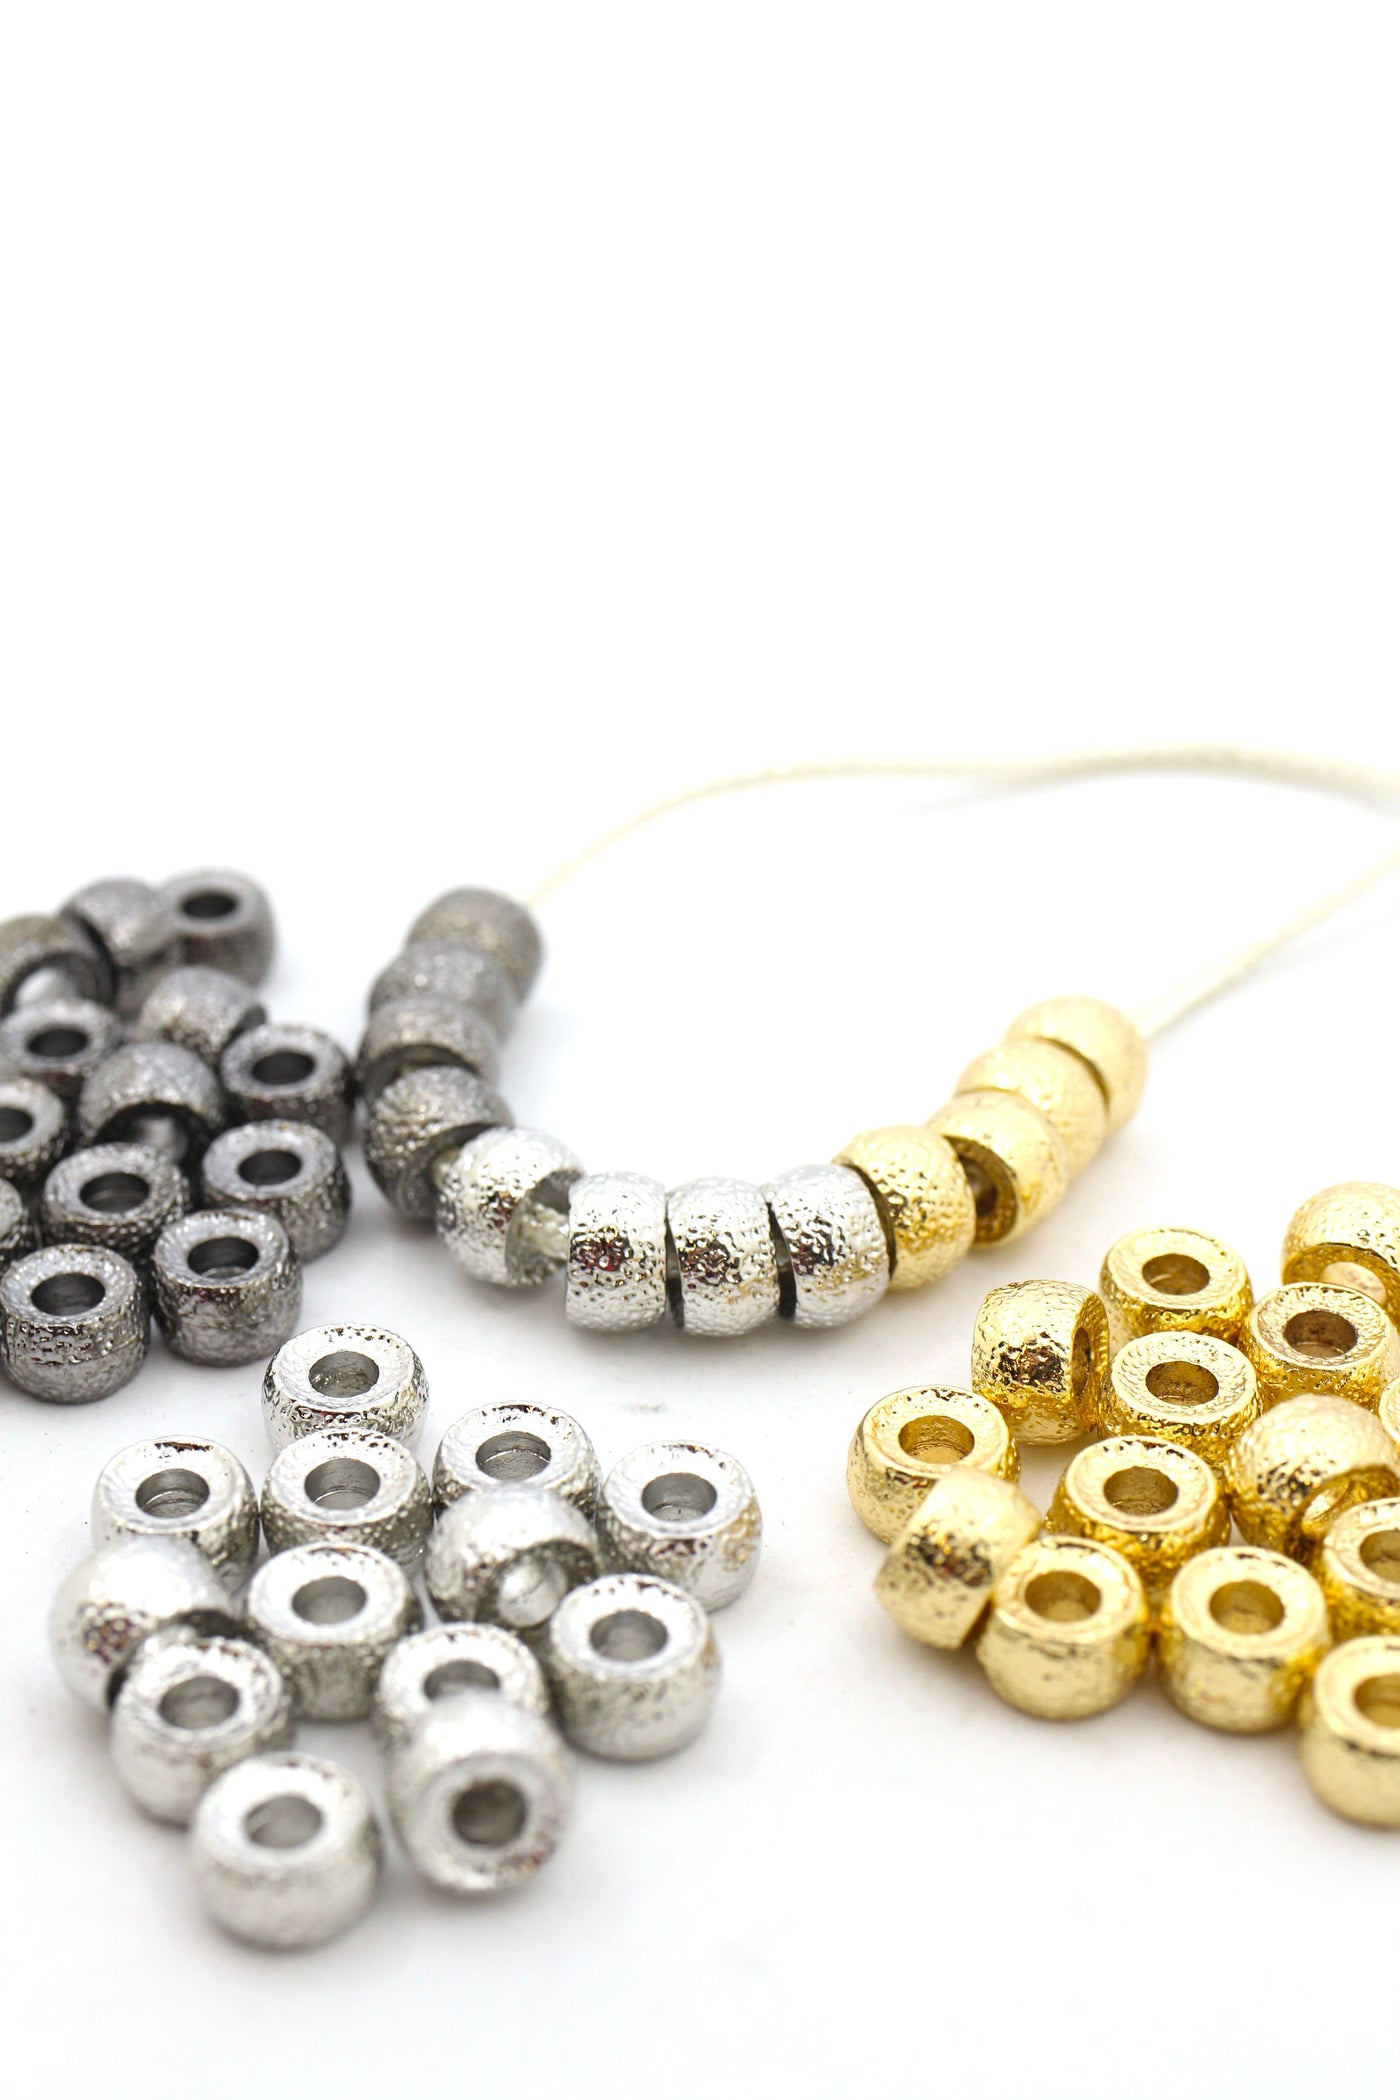 Textured Metal Pony Beads, Stardust Roller Beads, For Tie-On Bracelets & DIY Necklaces, 9x6mm, 1 bead